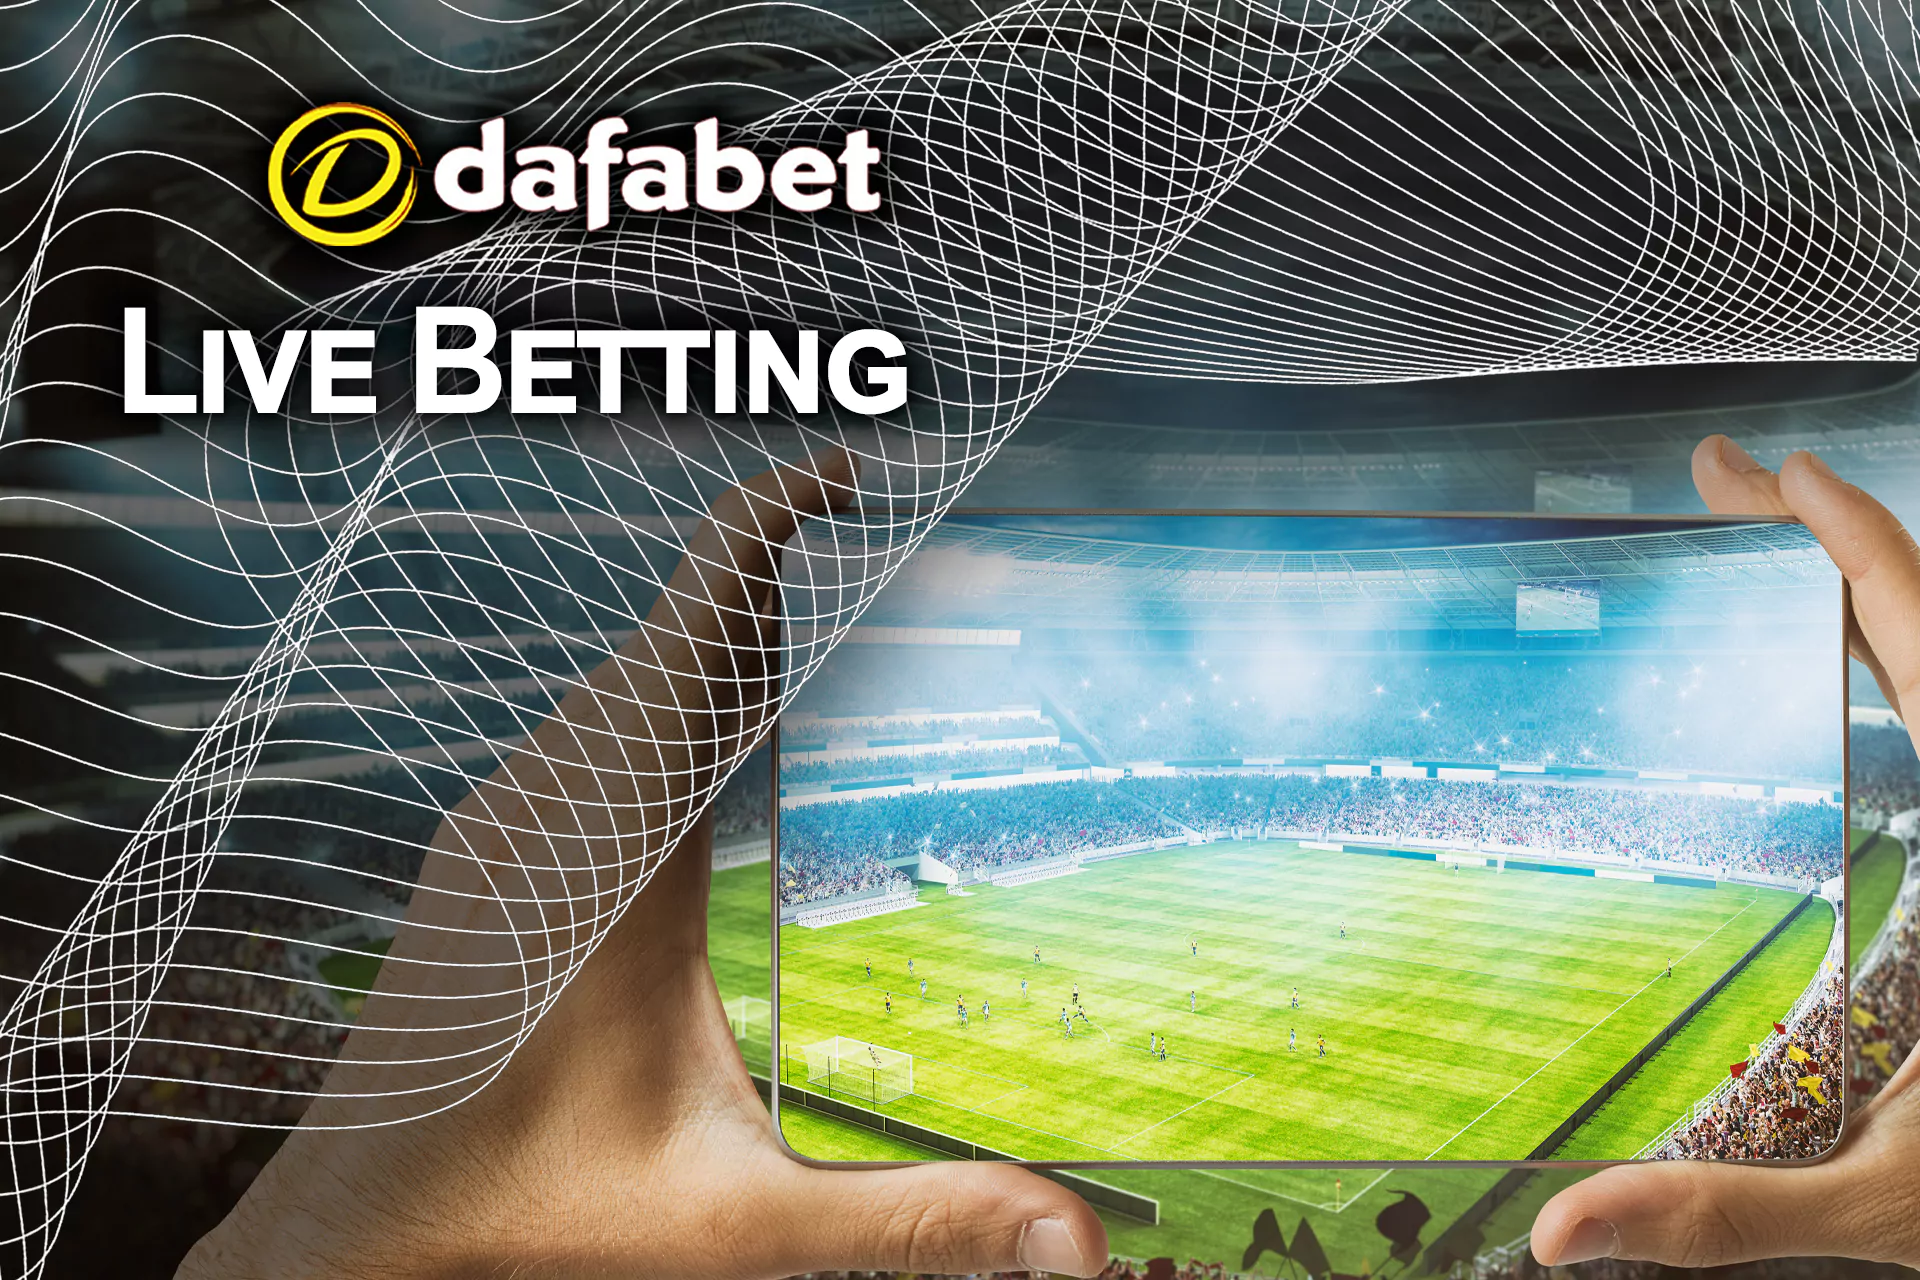 In the section of Live betting, you can place bets and change your prediction by watching a match.